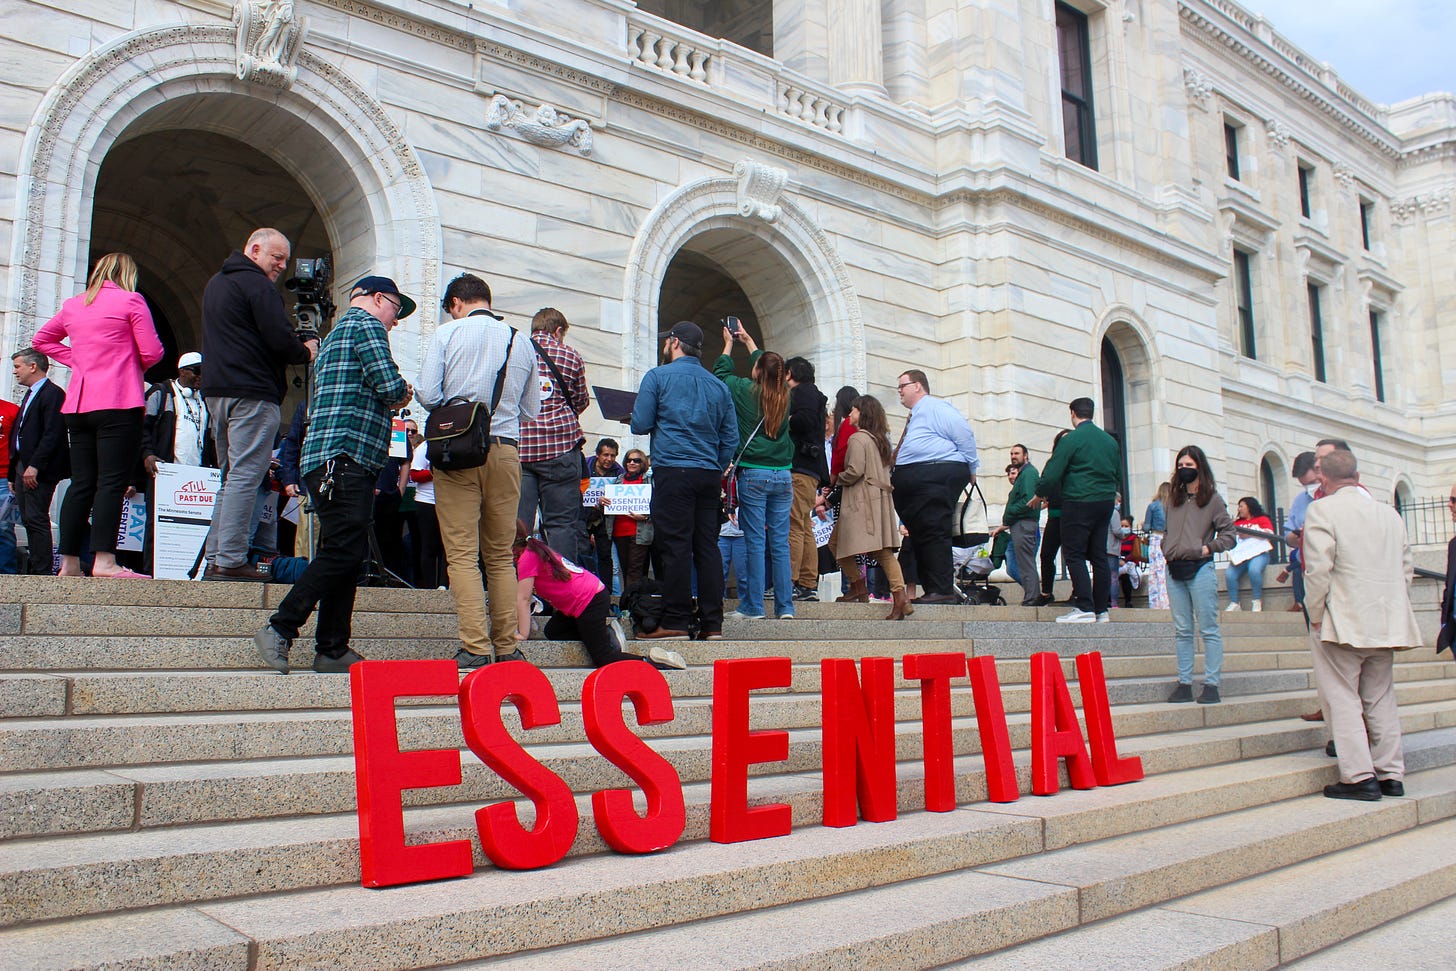 a crowd gathers on top of the capitol steps in front of big red letters that spell out "essential"